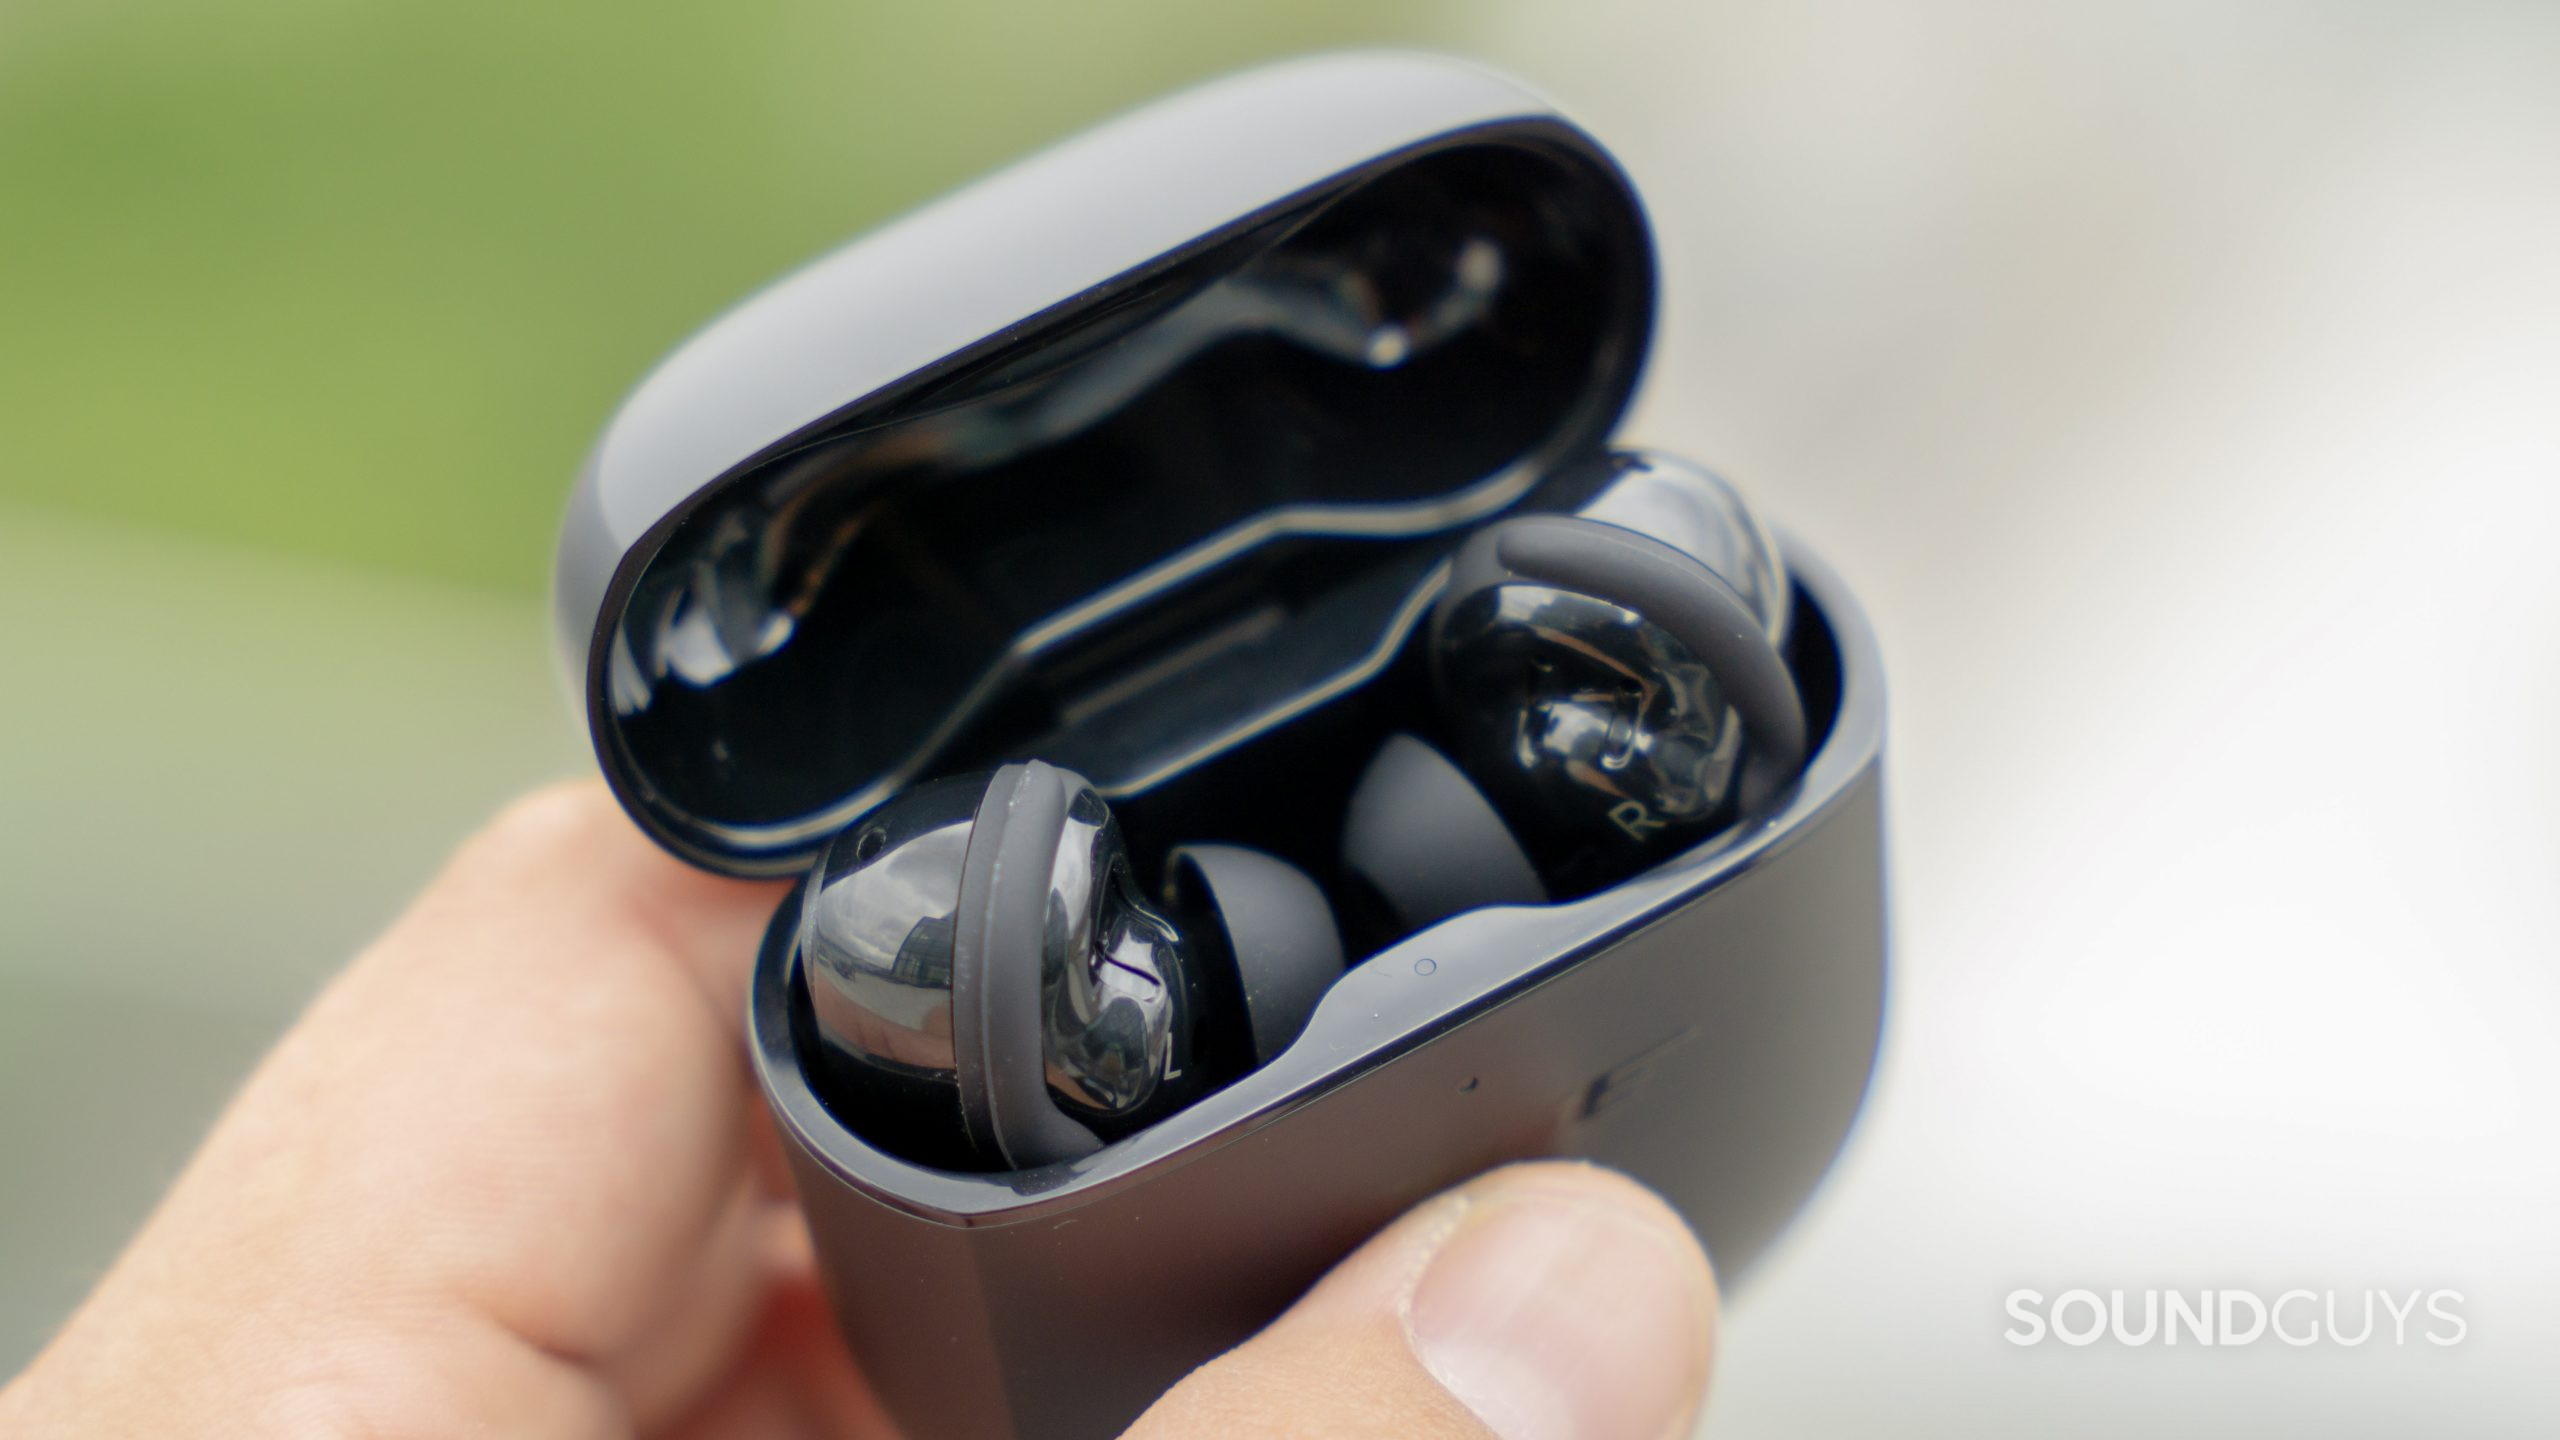 An angled view of a hand as it holds the Bose QuietComfort Earbuds II case with the lid flipped up to show the earphones.